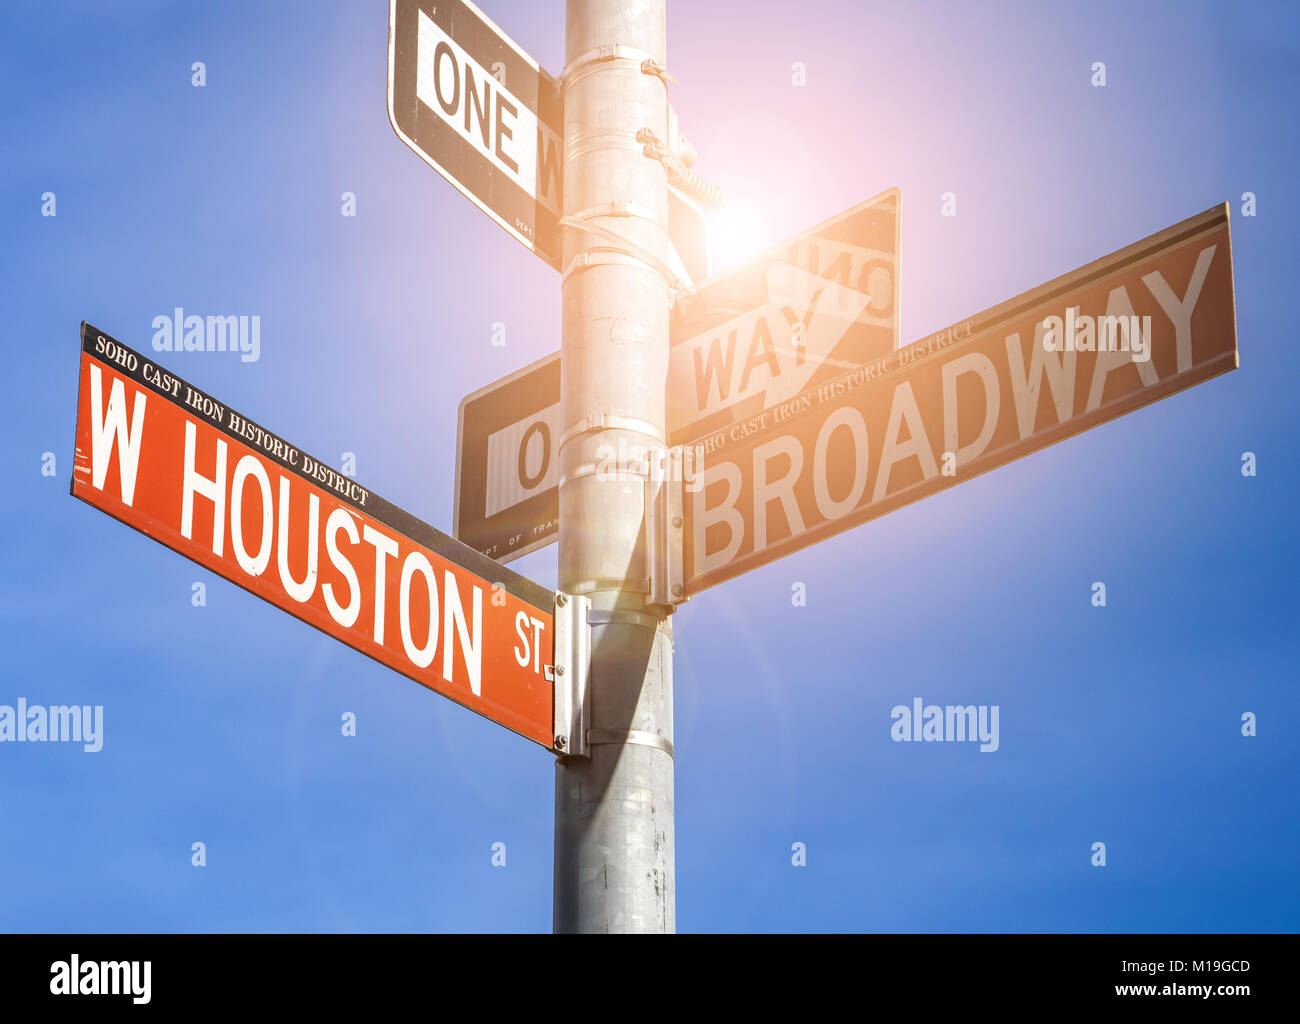 Houston and Broadway street signs in SoHo New York City Stock Photo